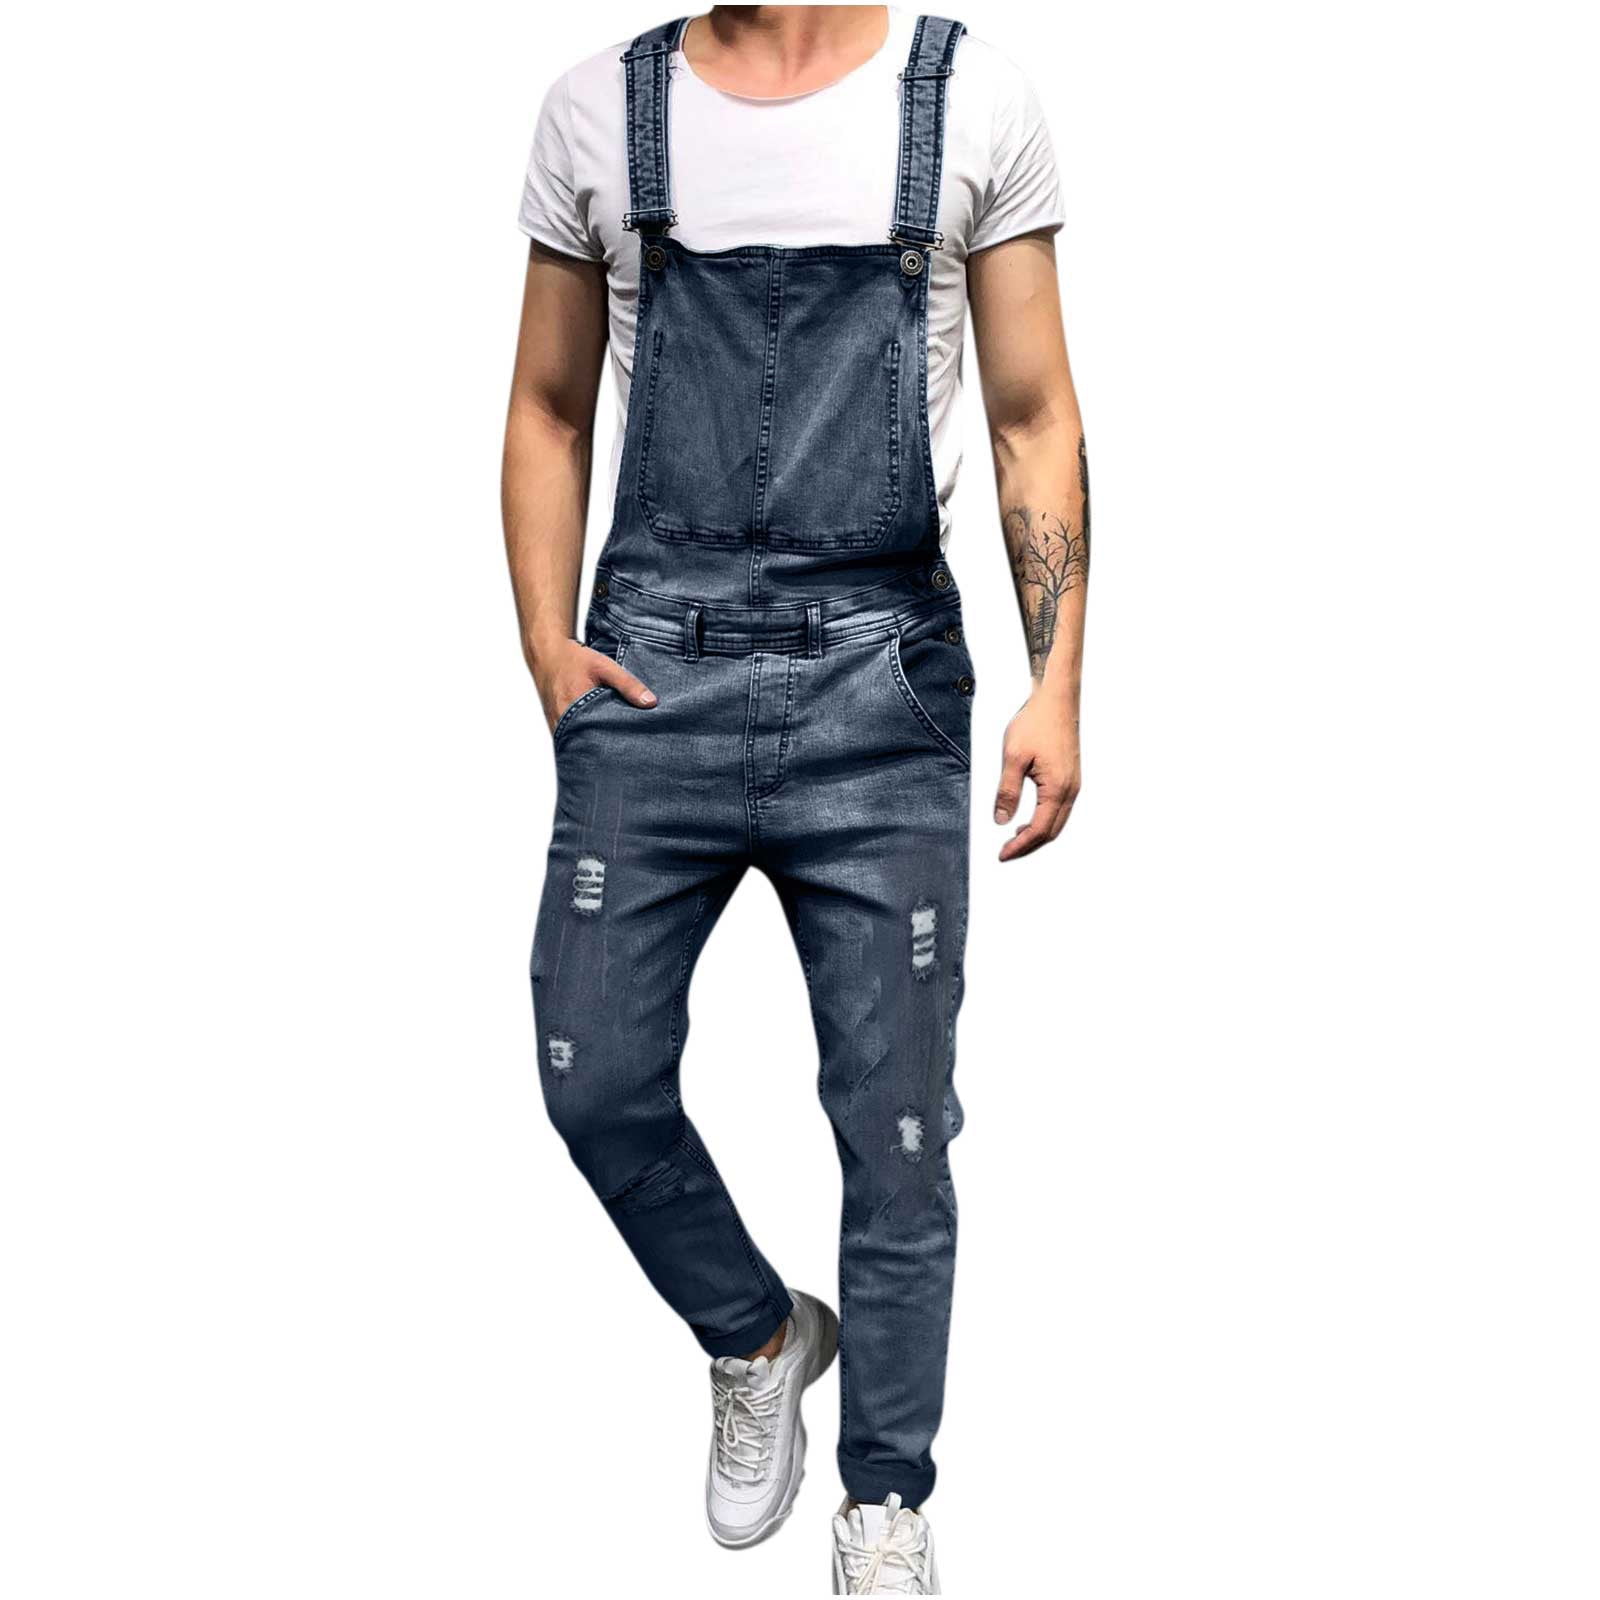 Vintage High Waist Denim Jumpsuit For Men Sleeveless One Piece Outfit With  Bib, Baggy Jeans Cargo, And Overalls For Spring And Summer From Fourforme,  $41.59 | DHgate.Com